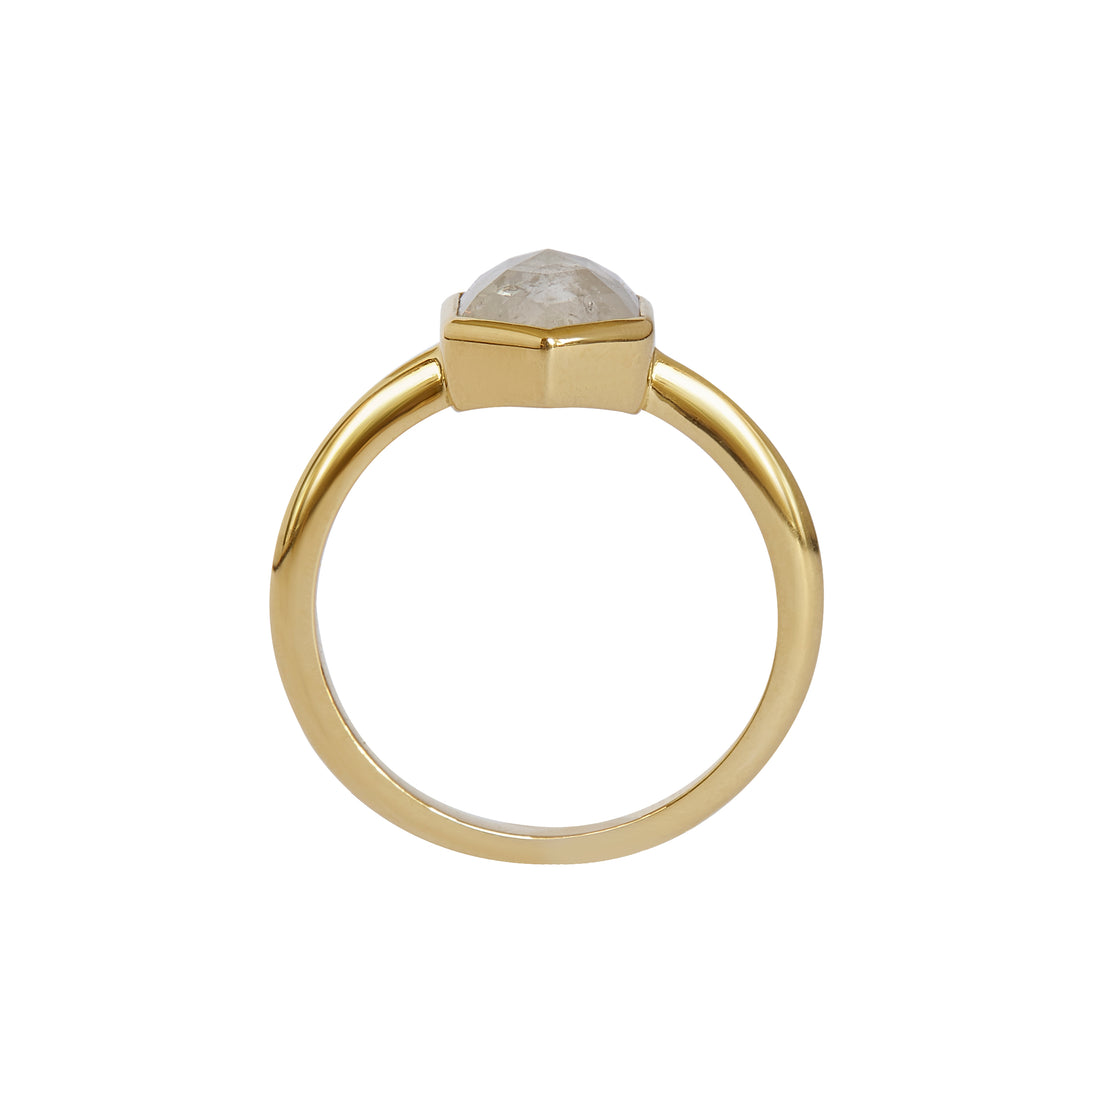  Icy Grey Diamond Ring by Gee Woods | The Cut London